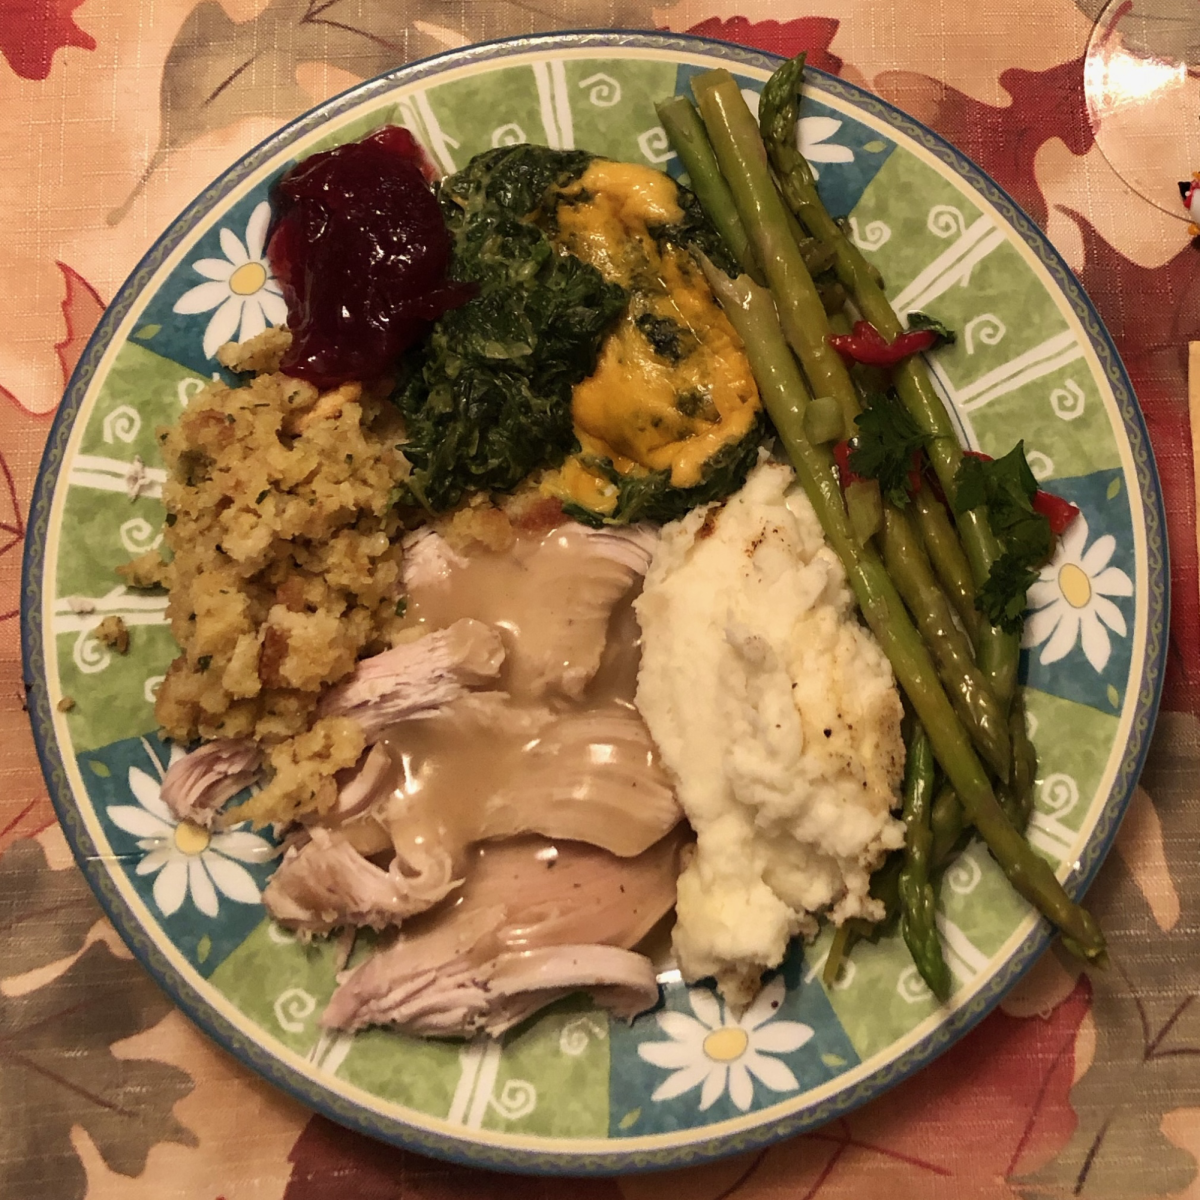 Grandpa’s spinach casserole and Holiday green beans are featured on this Thanksgiving plate!